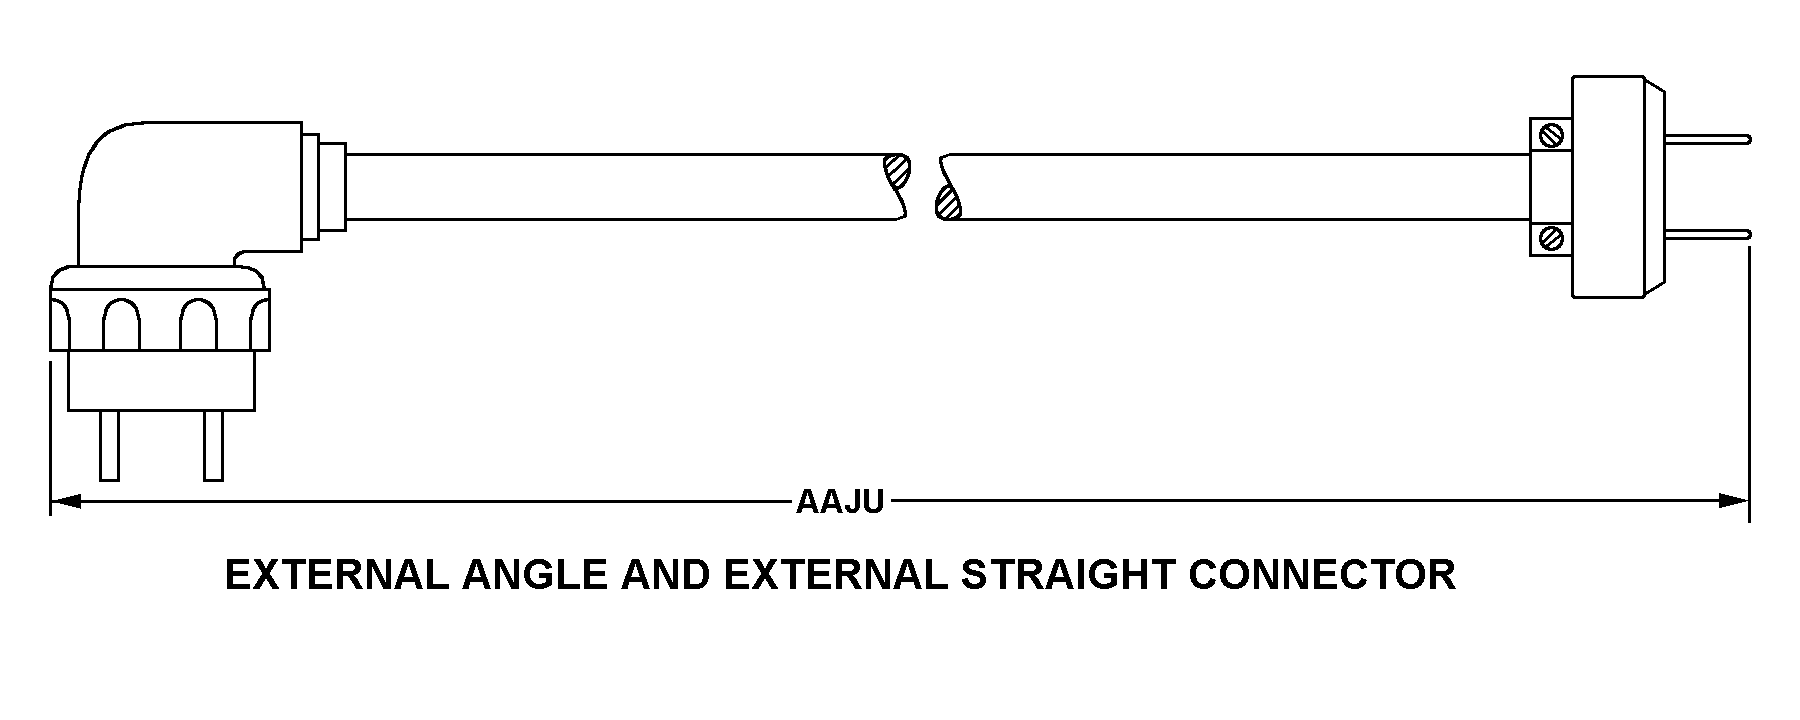 EXTERNAL ANGLE AND EXTERNAL STRAIGHT CONNECTOR style nsn 6150-01-371-0275